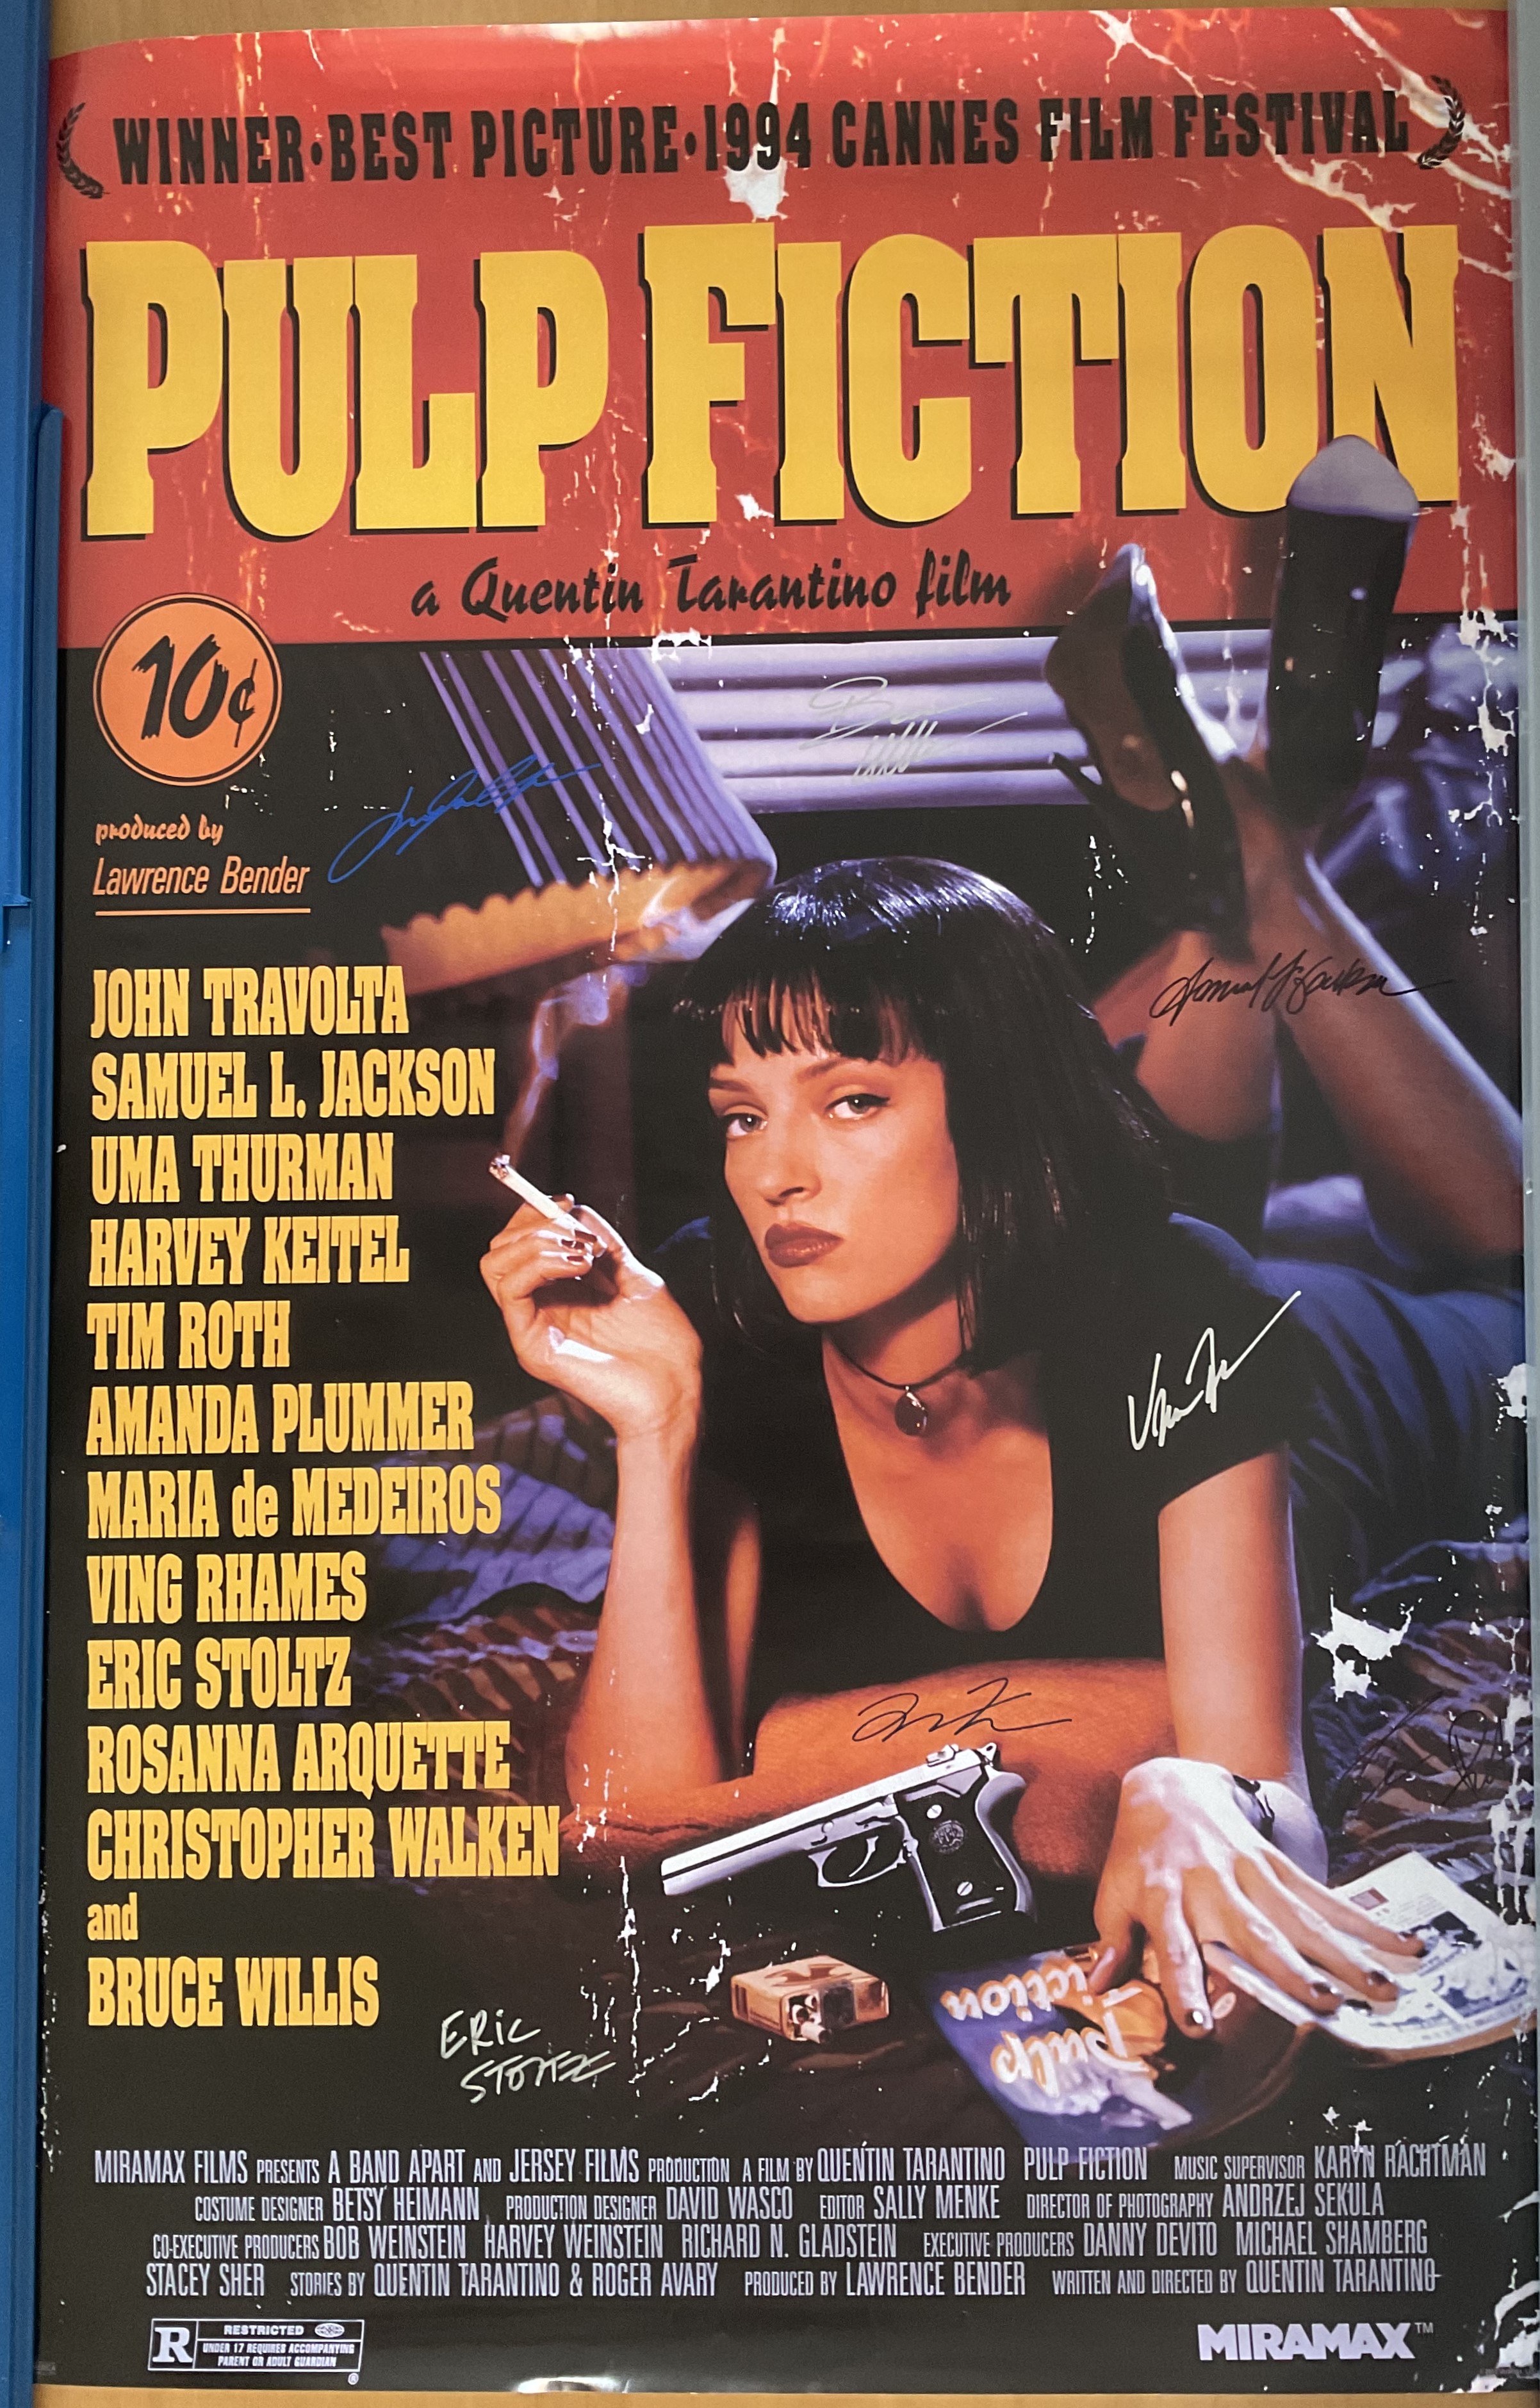 Original (1994) movie poster for Pulp Fiction. Signed by six principal cast members plus Director